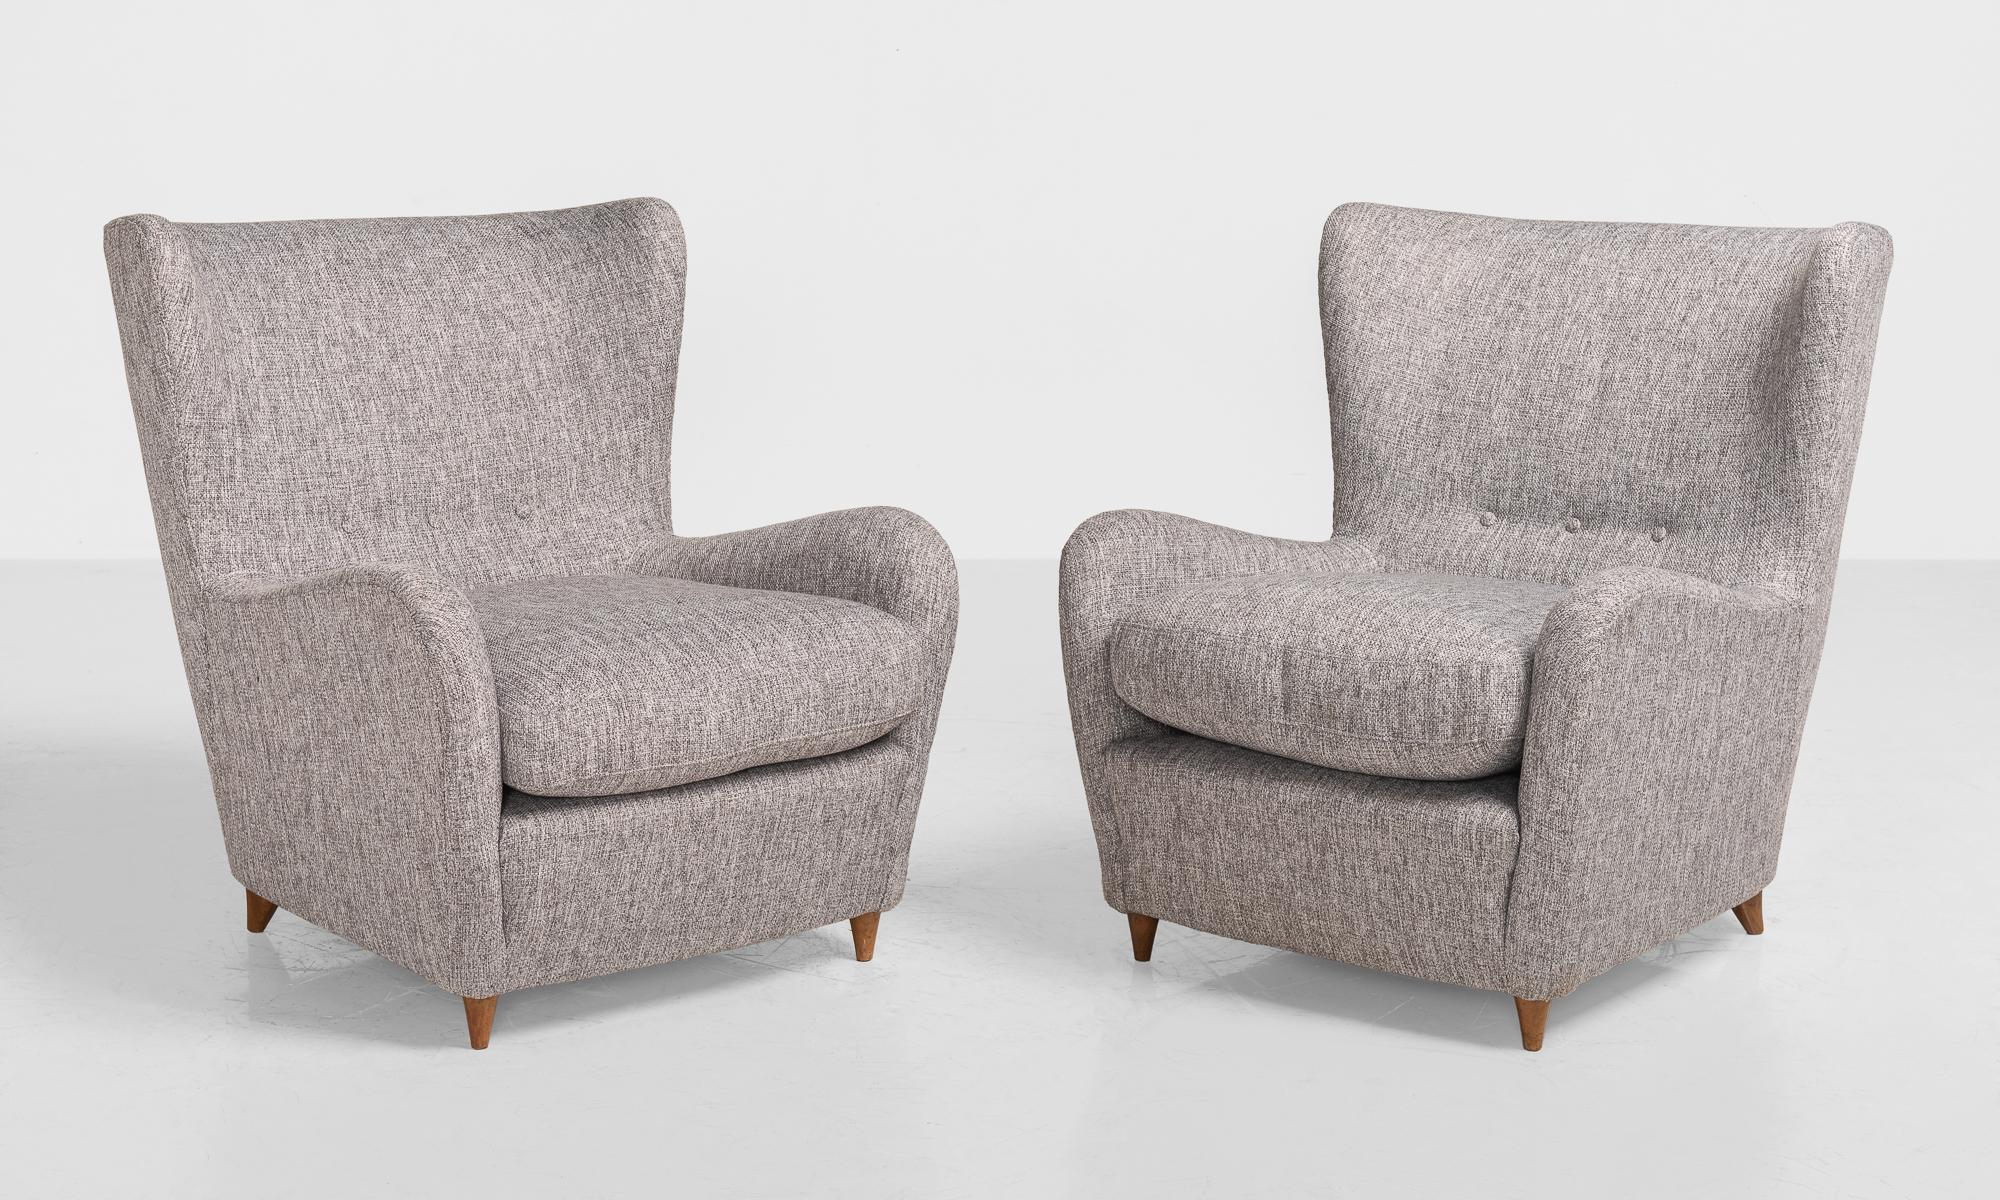 Pair of Paolo Buffa wool armchairs, Italy, circa 1950.

Newly upholstered in wool, with wooden feet.
 
Measures: 29.5